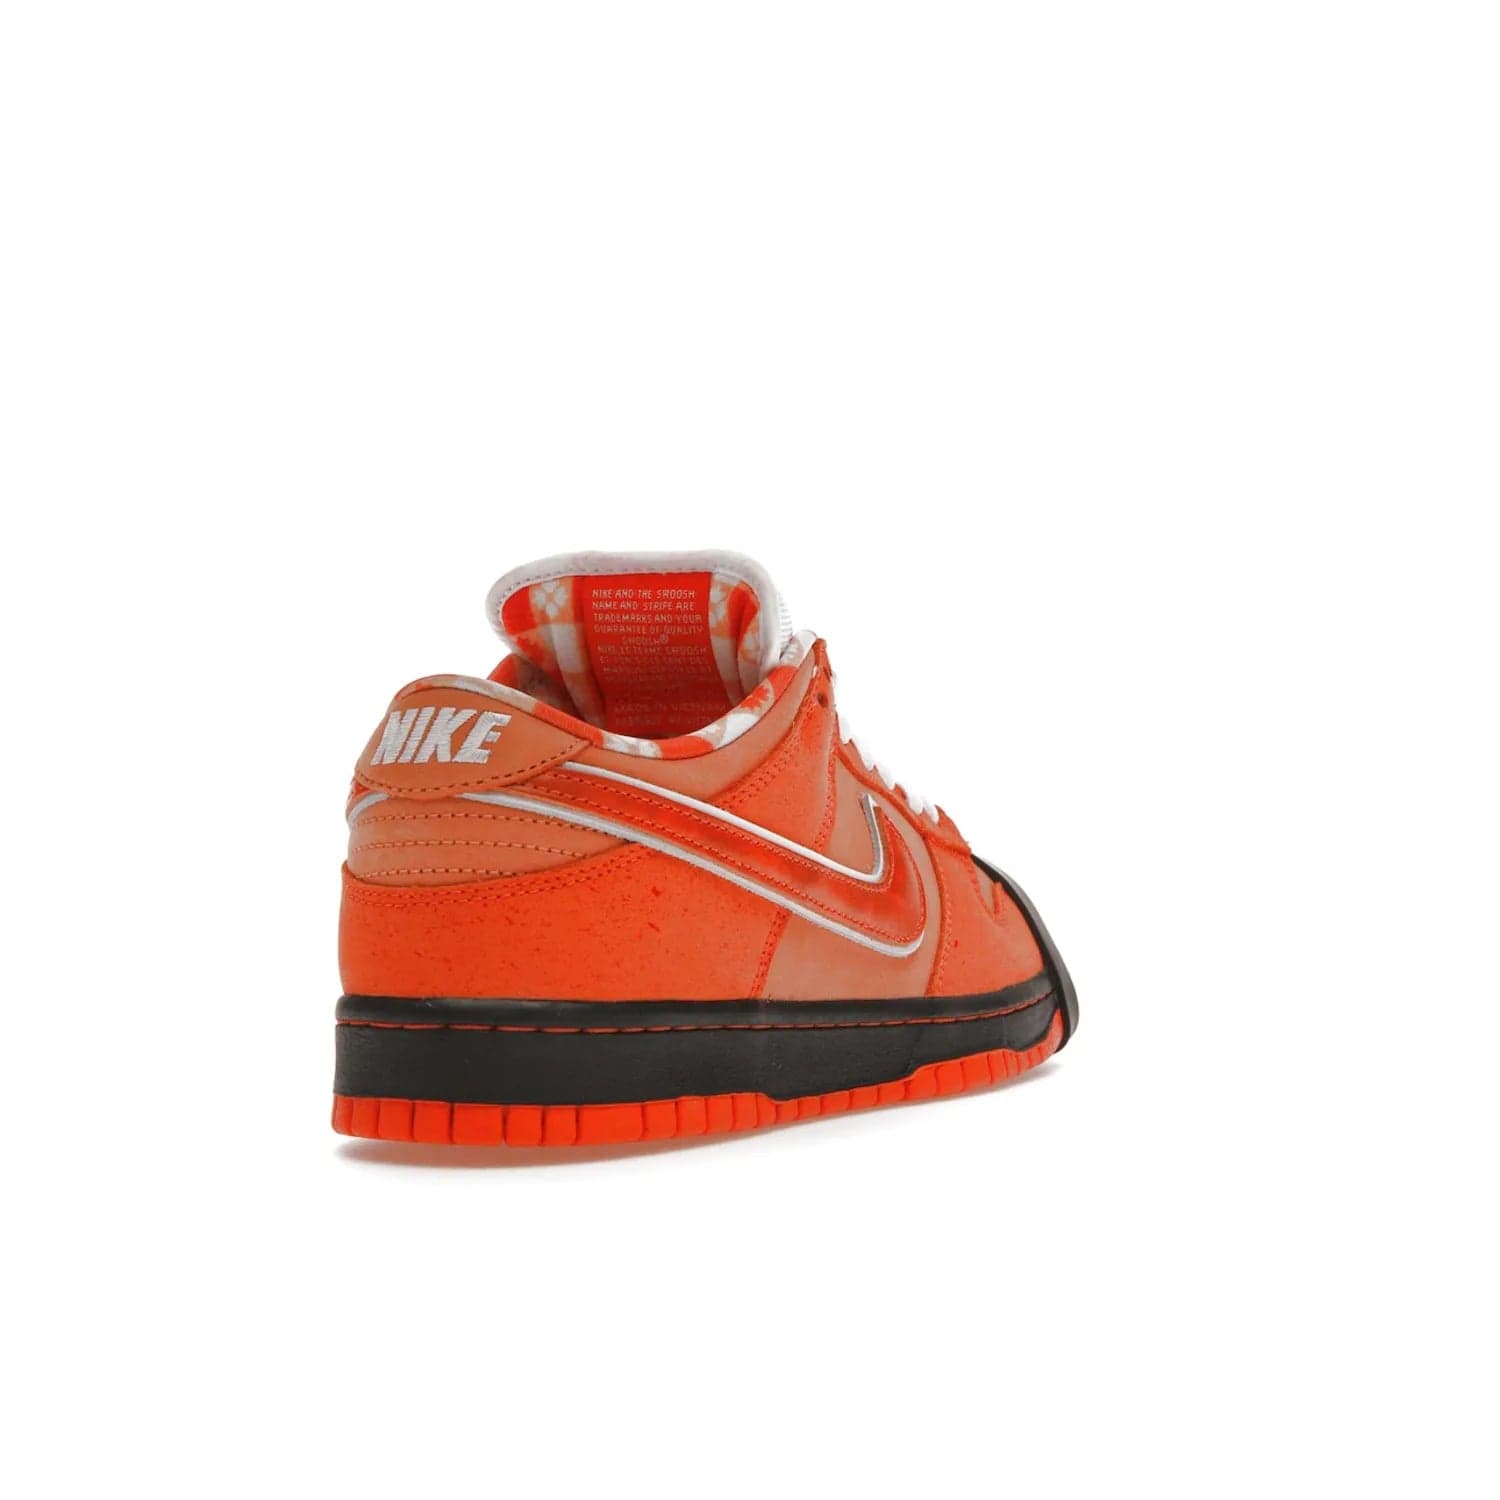 Nike SB Dunk Low Concepts Orange Lobster - Image 31 - Only at www.BallersClubKickz.com - Limited Nike SB Dunk Low Concepts Orange Lobster features premium nubuck upper with vibrant oranges for eye-catching colorblocked design. Signature Nike SB tag and bib-inspired interior for added texture. Outsole and cupsole provide extra reinforcement. Get it 12/20/2022.